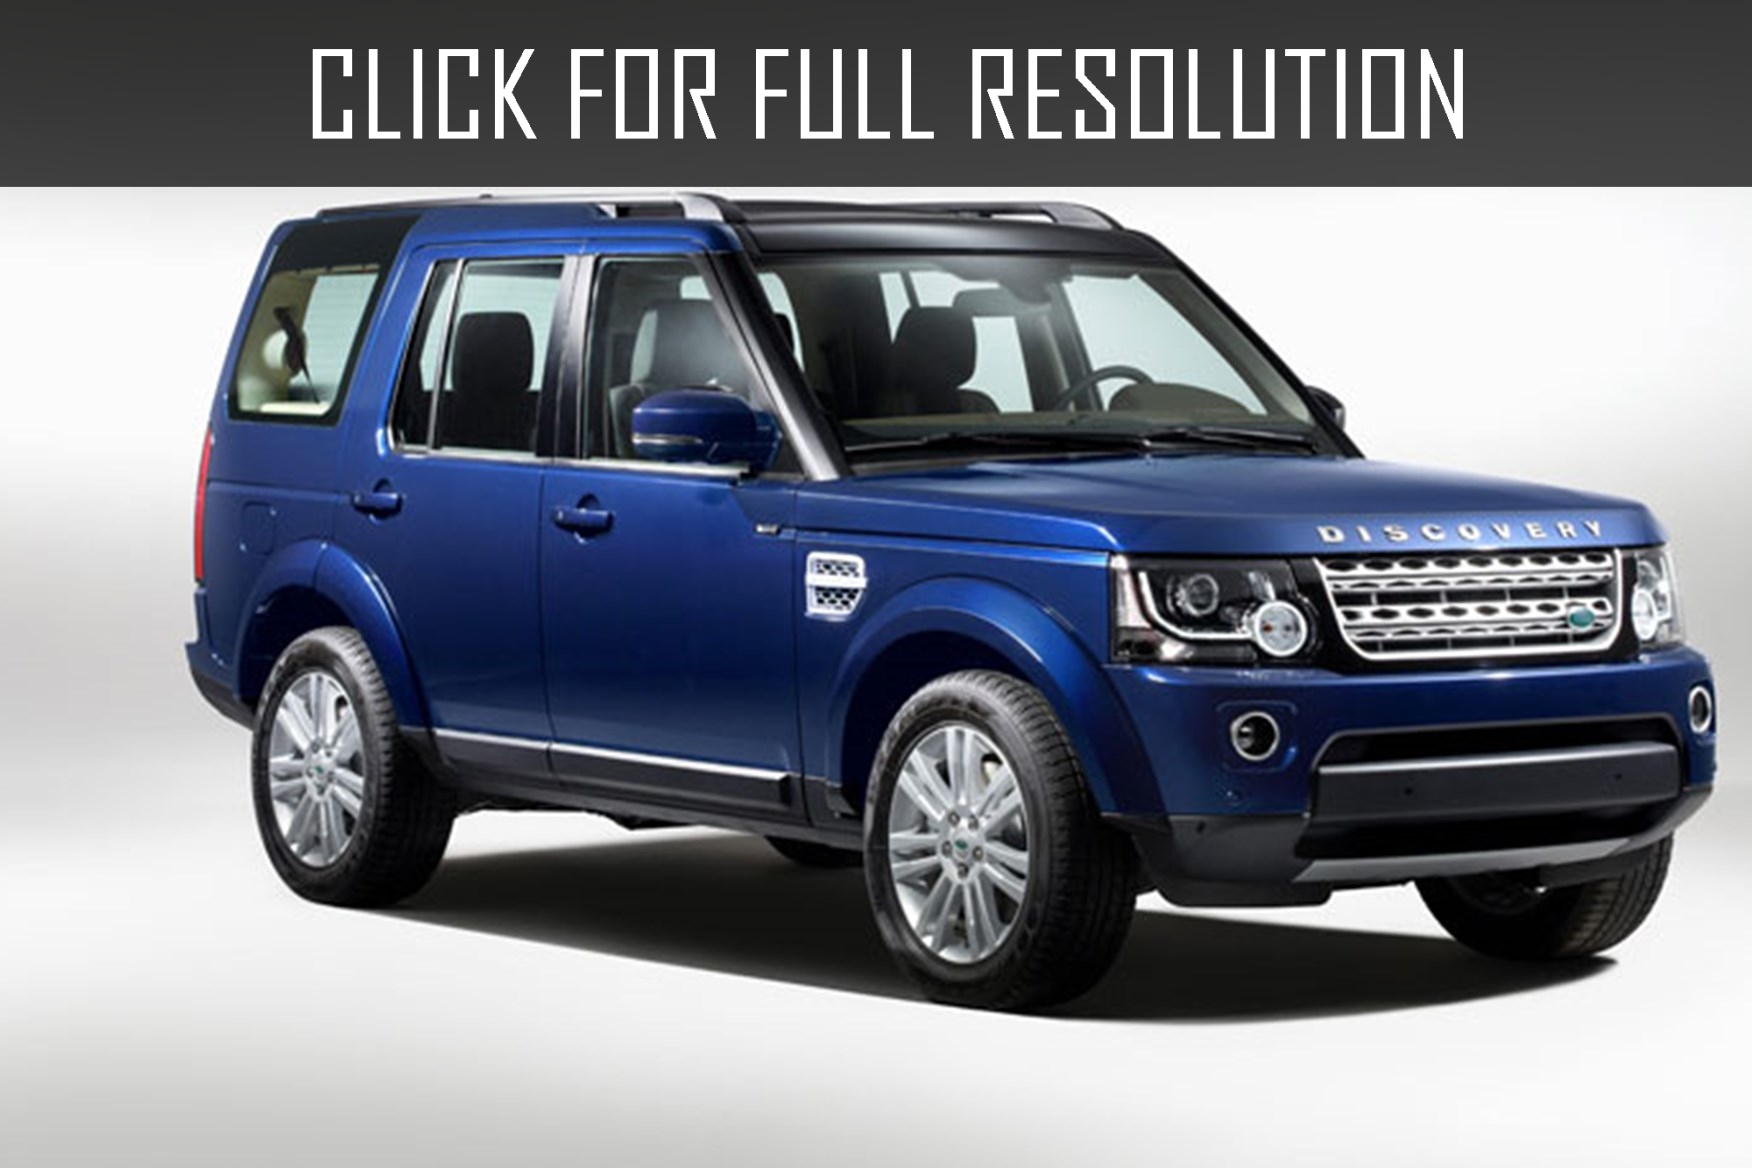 2013 Land Rover Discovery 4